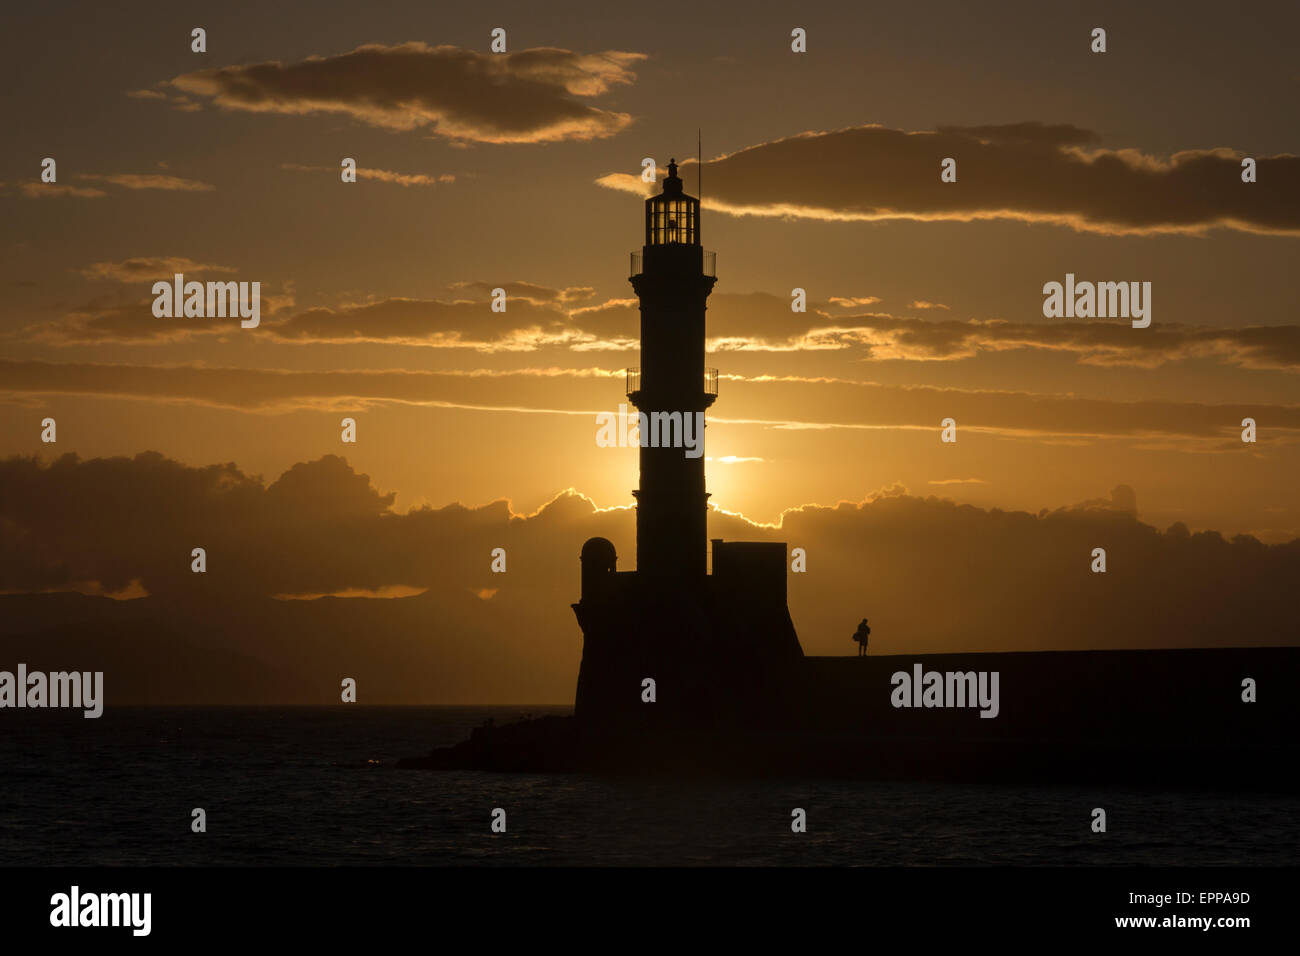 The venetian lighthouse of the old harbor at Old Town of Chania, Crete island. Stock Photo